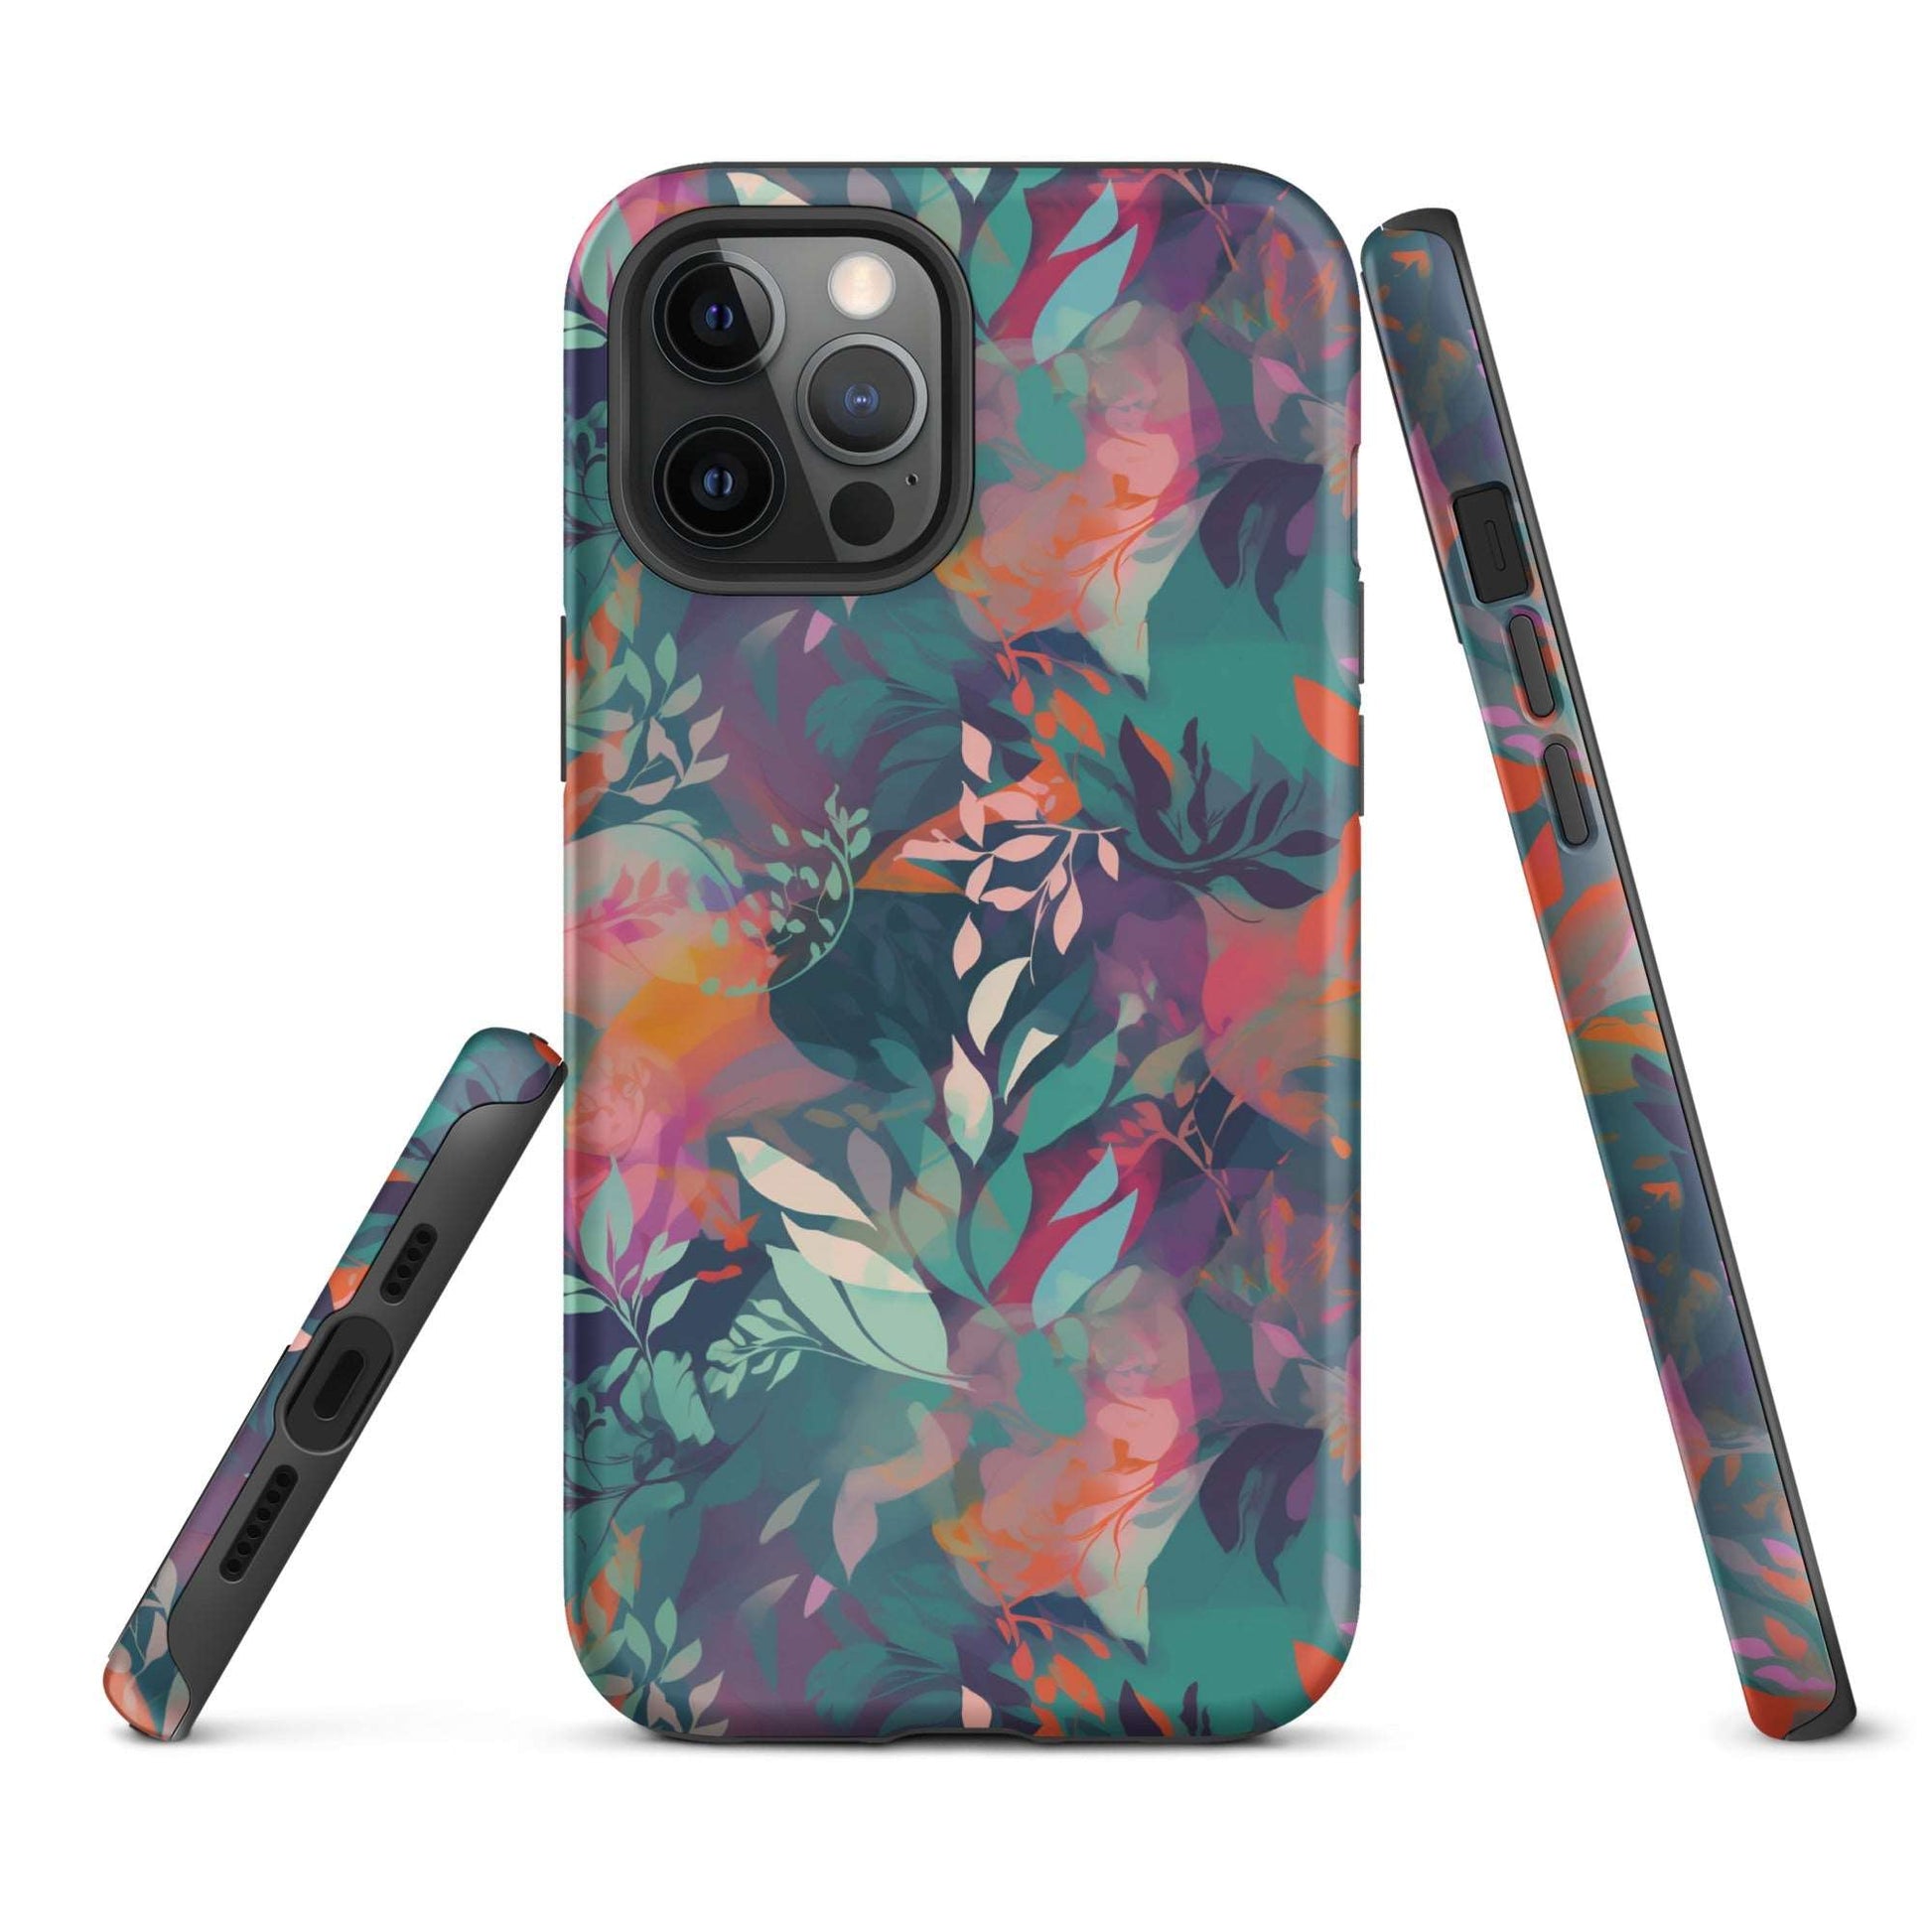 Botanical Bliss - Stylized Abstract Flower Design - iPhone Case - Pattern Symphony